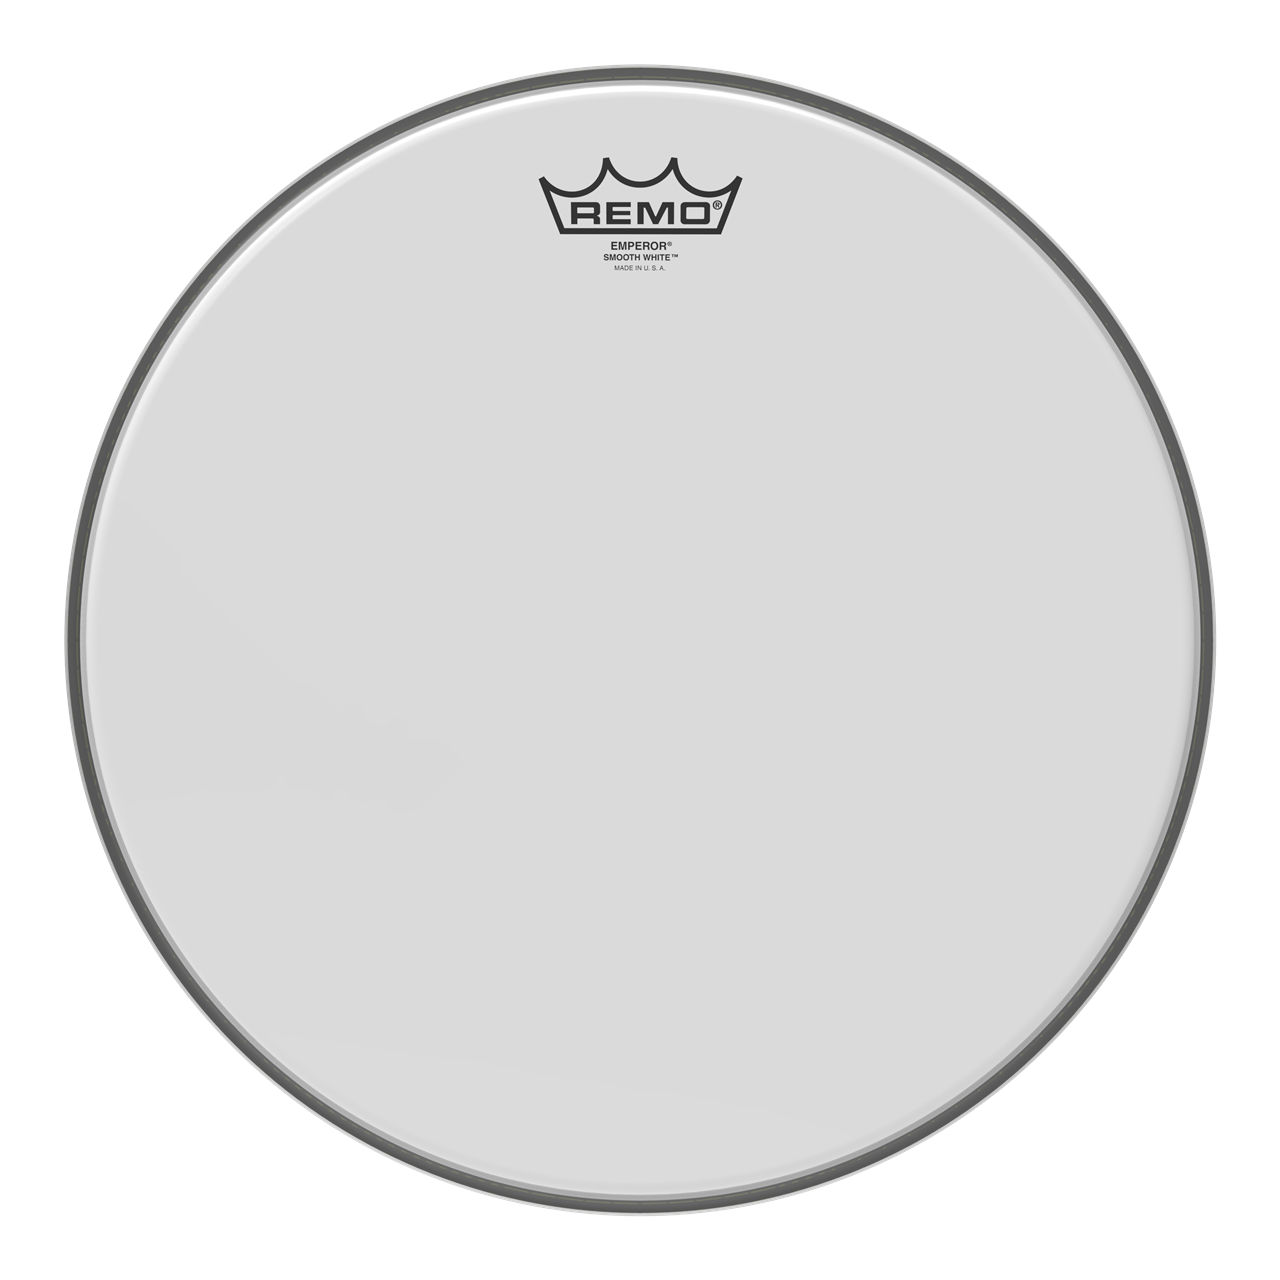 Remo BE-0210-00 Emperor, 10" Smooth White